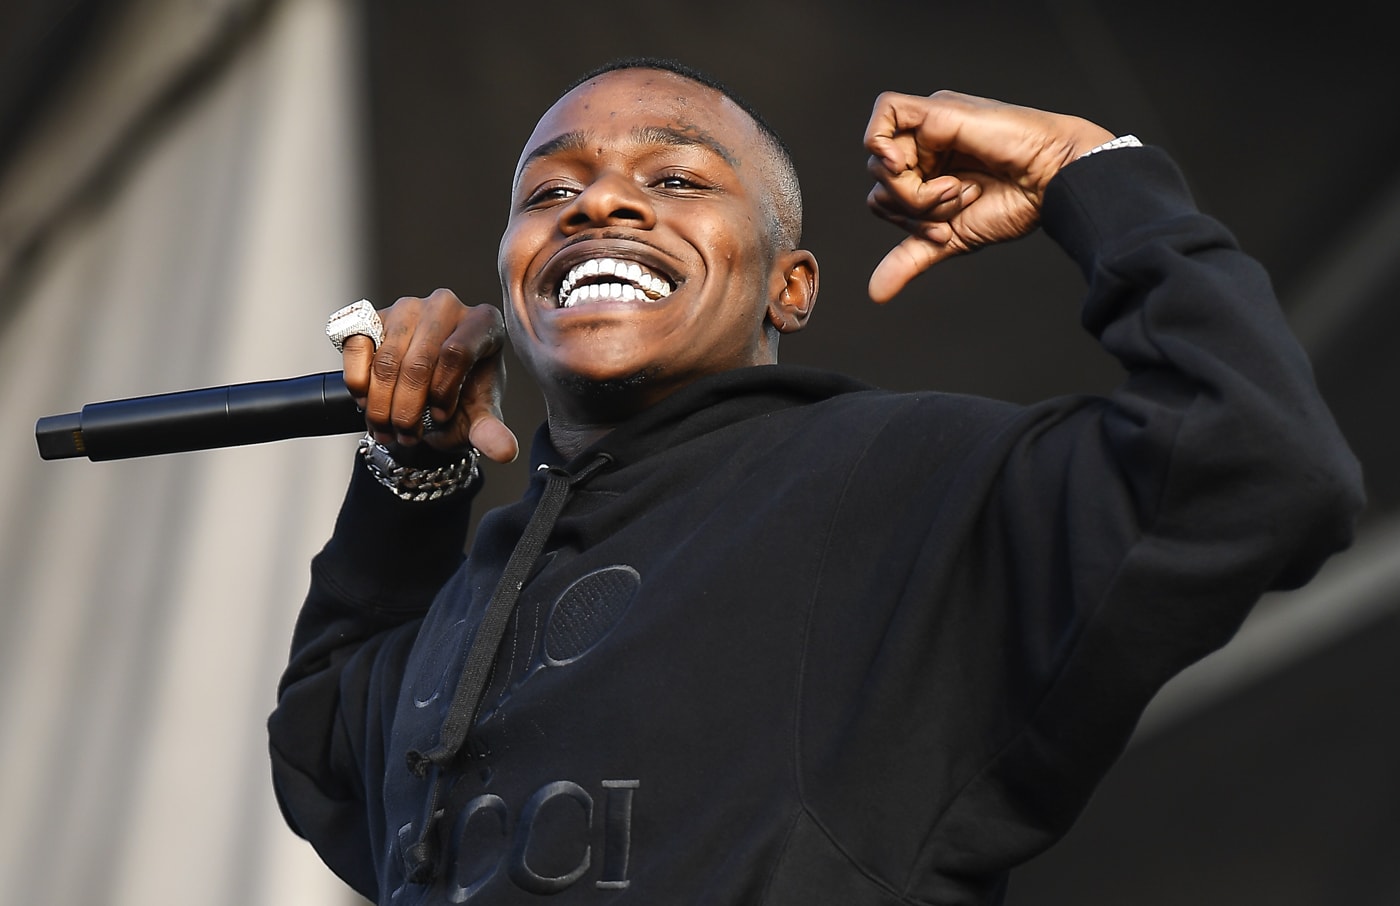 DaBaby's best songs